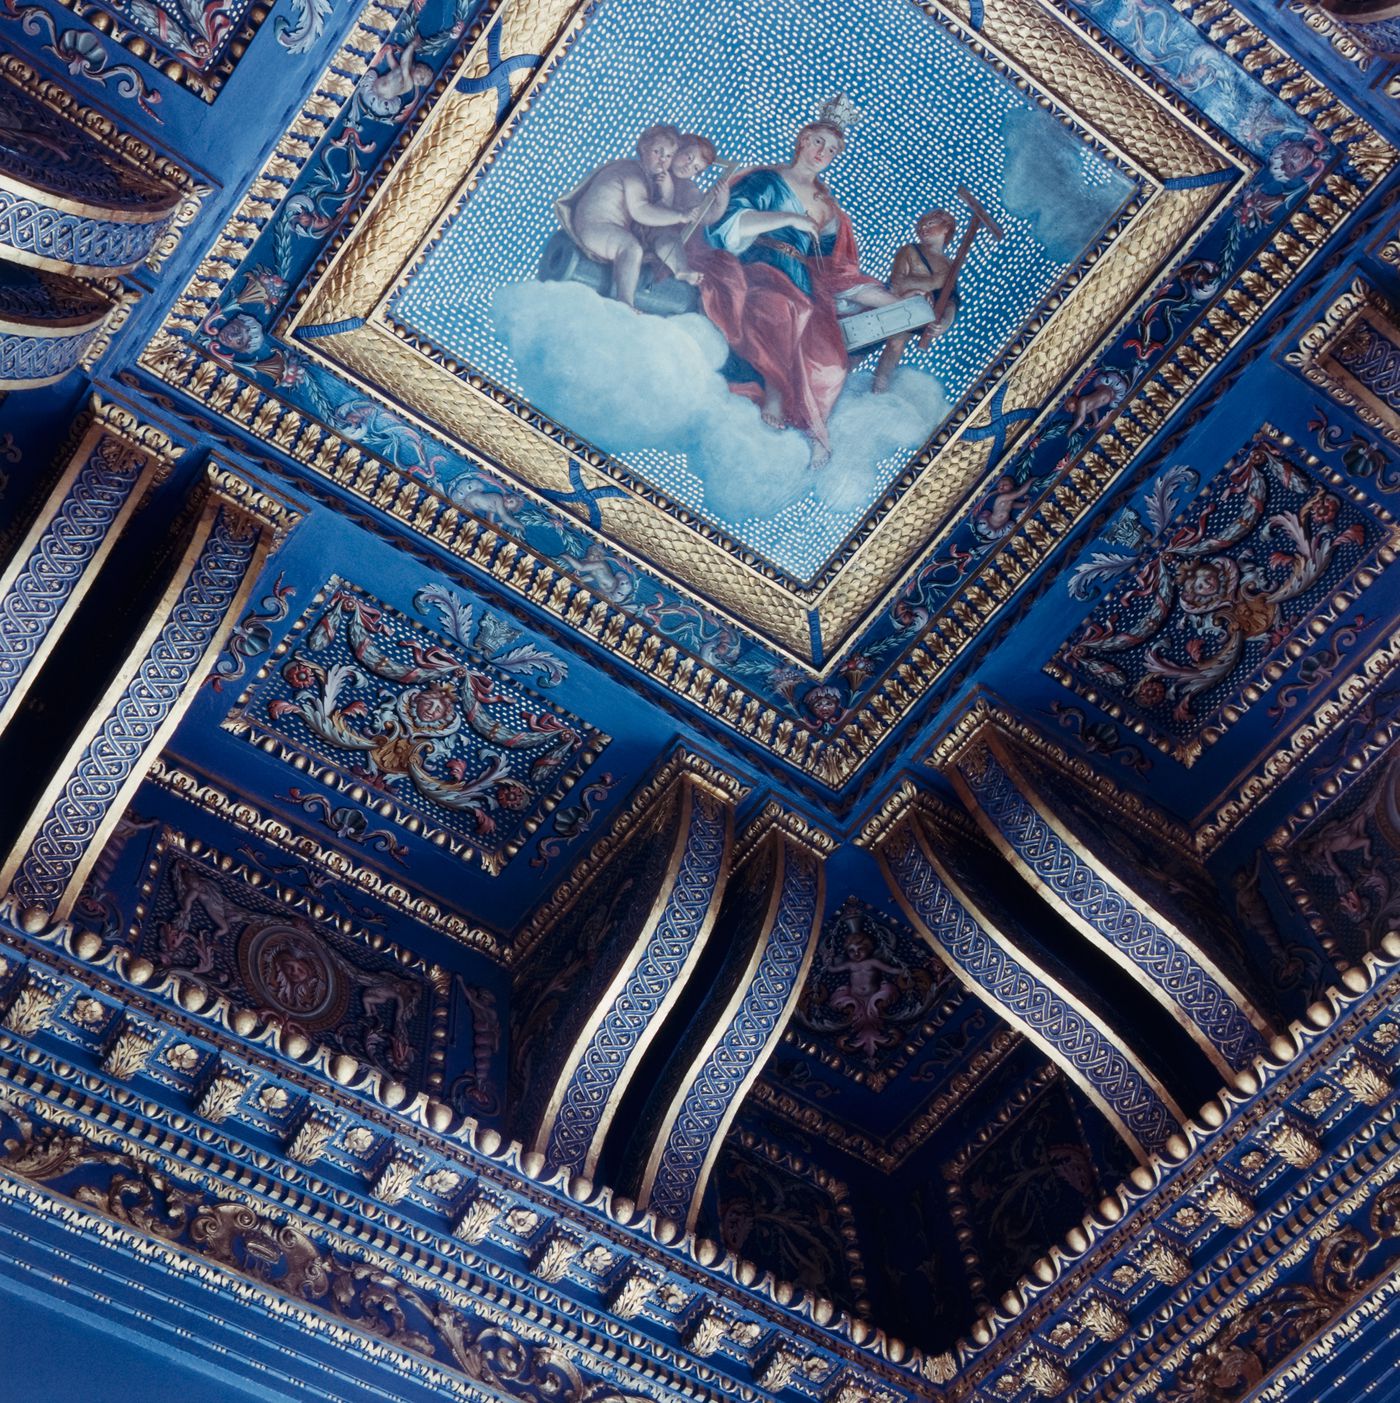 Detail view of the Blue Velvet Room ceiling, Chiswick House, Hounslow, London, England